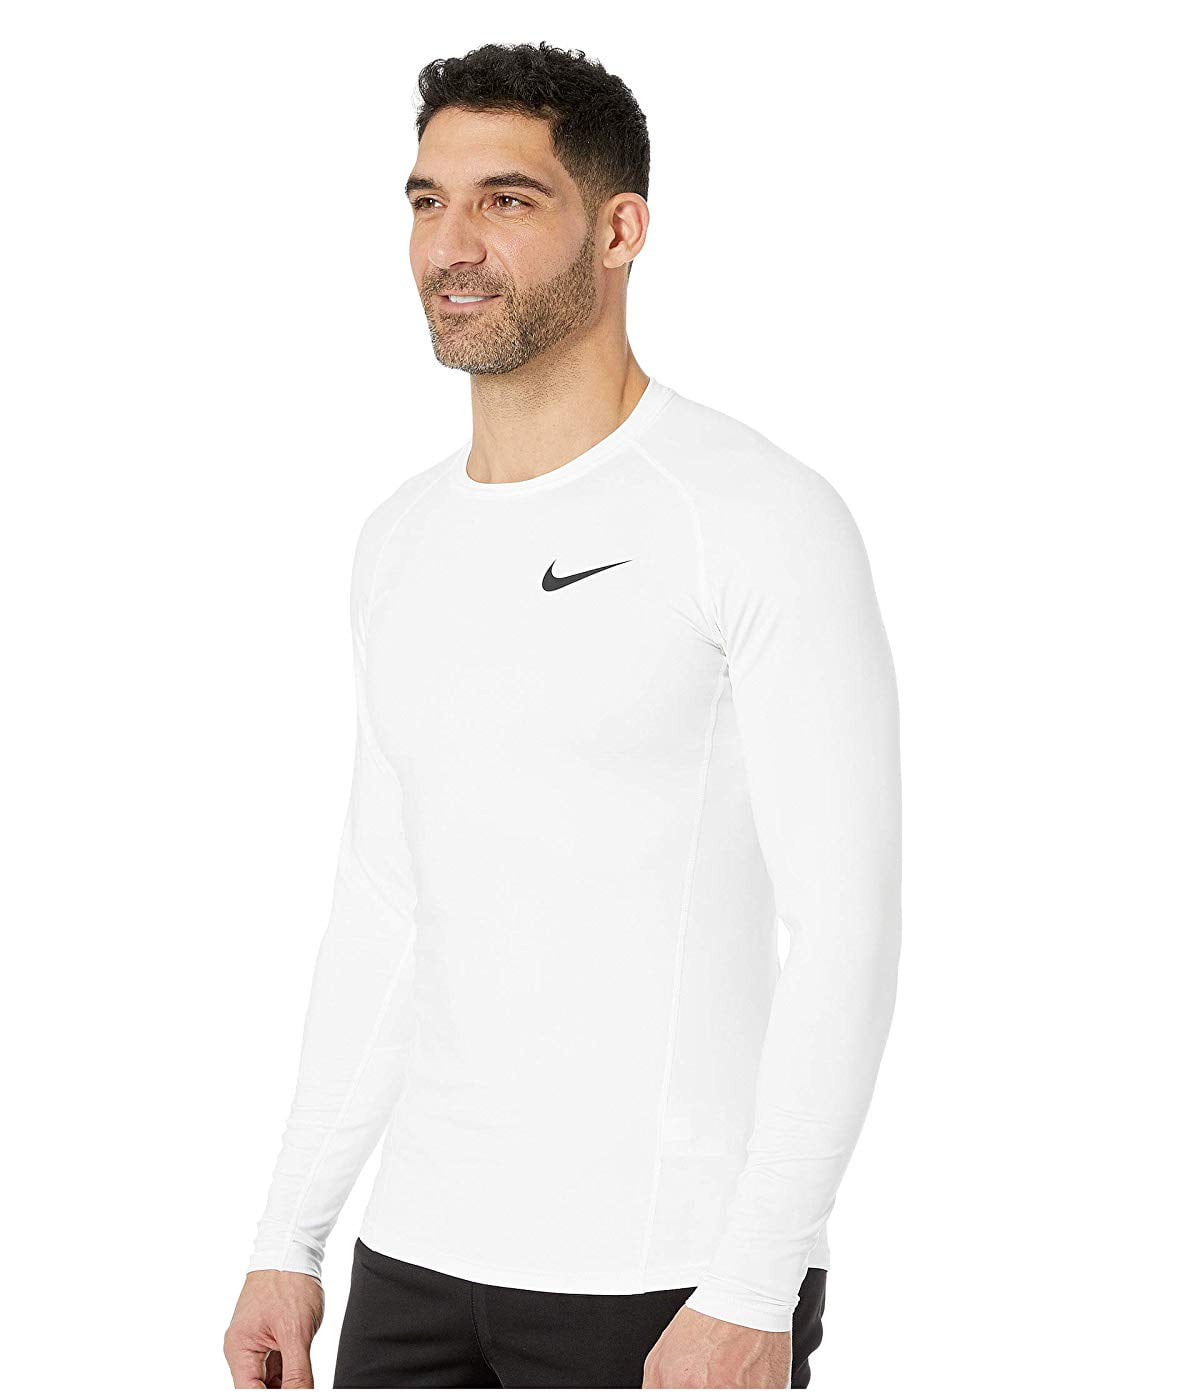 Nike Men's Pro Cool Dri-FIT Fitted Long-Sleeve Shirt - Macy's